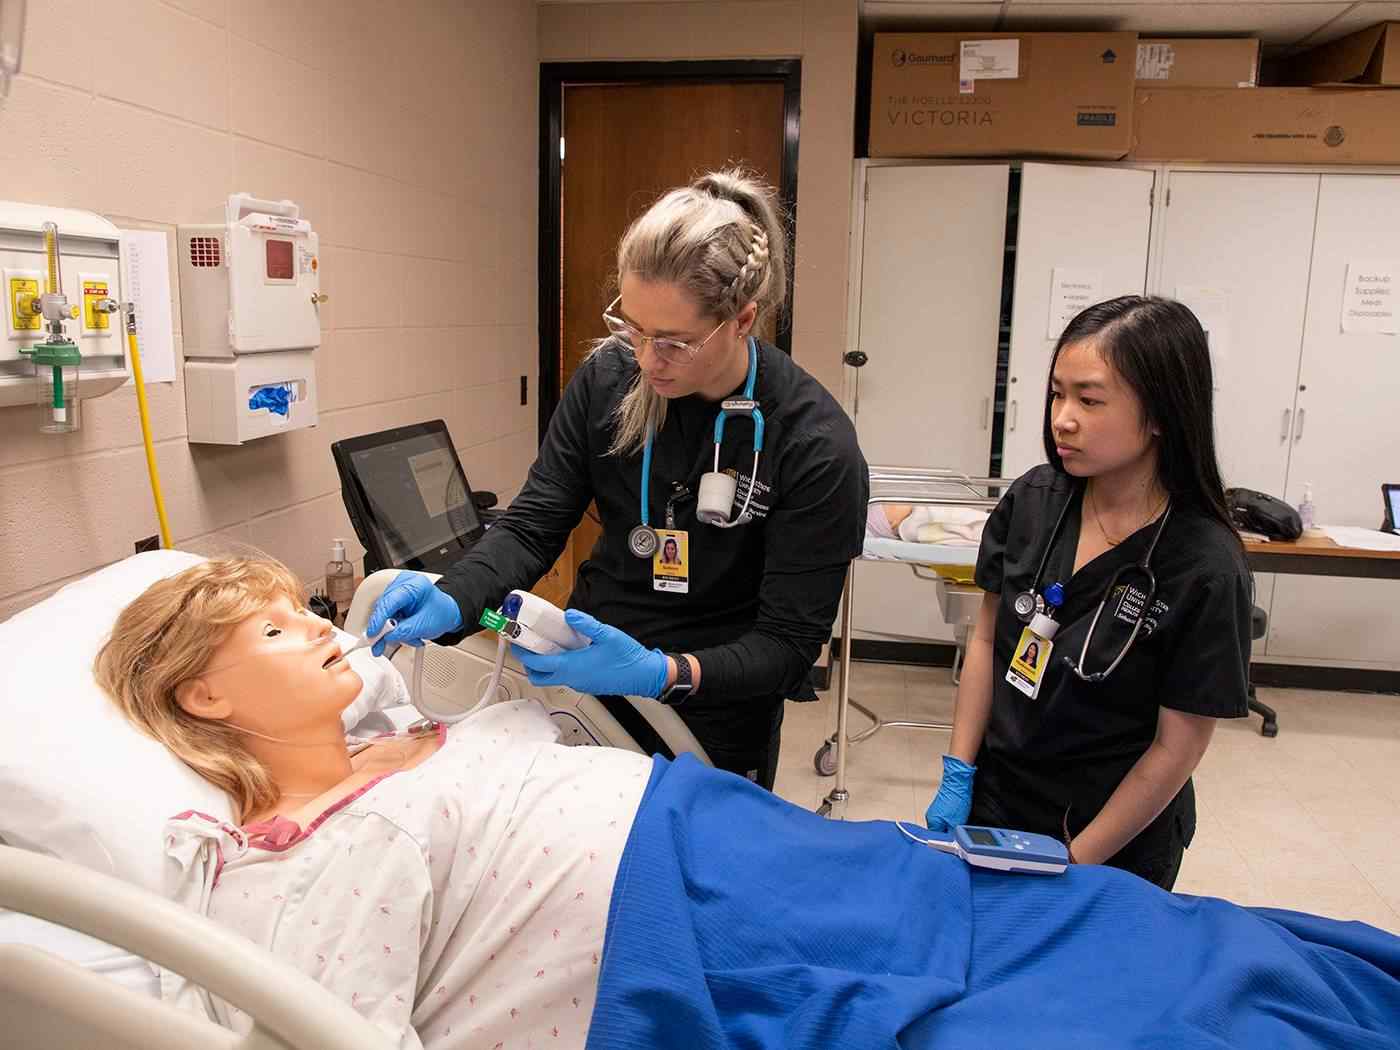 Nursing students receive an interactive experience with state-of-the-art simulation mannequins in a realistic and safe environment.